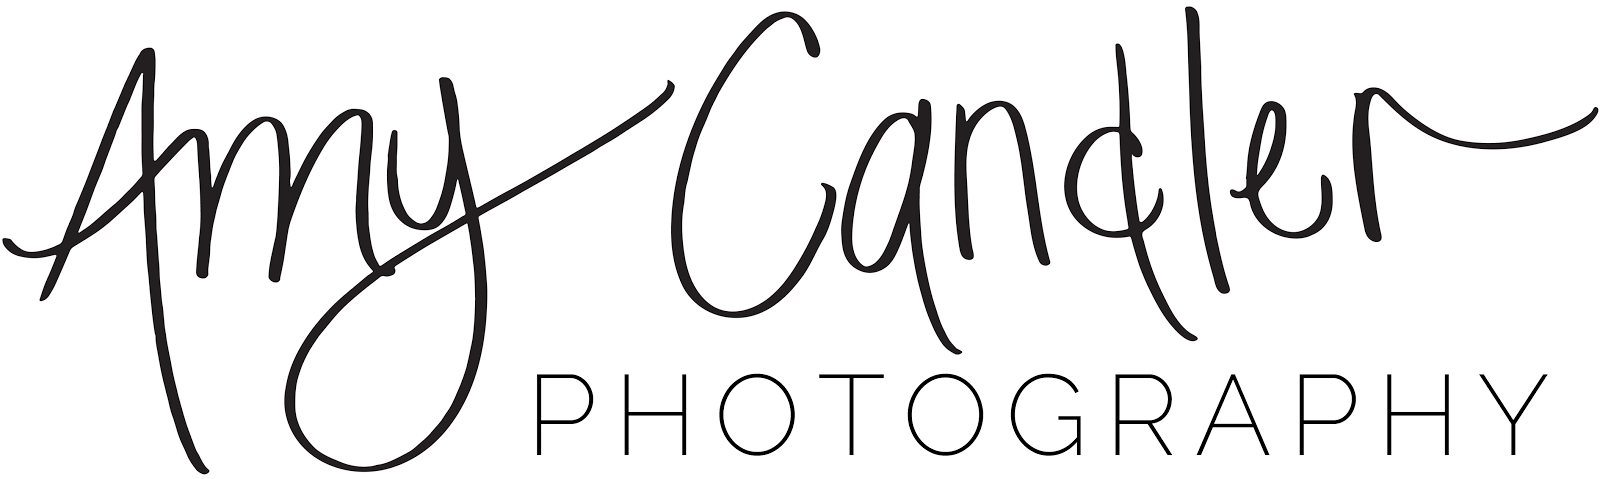 Amy Candler Photography